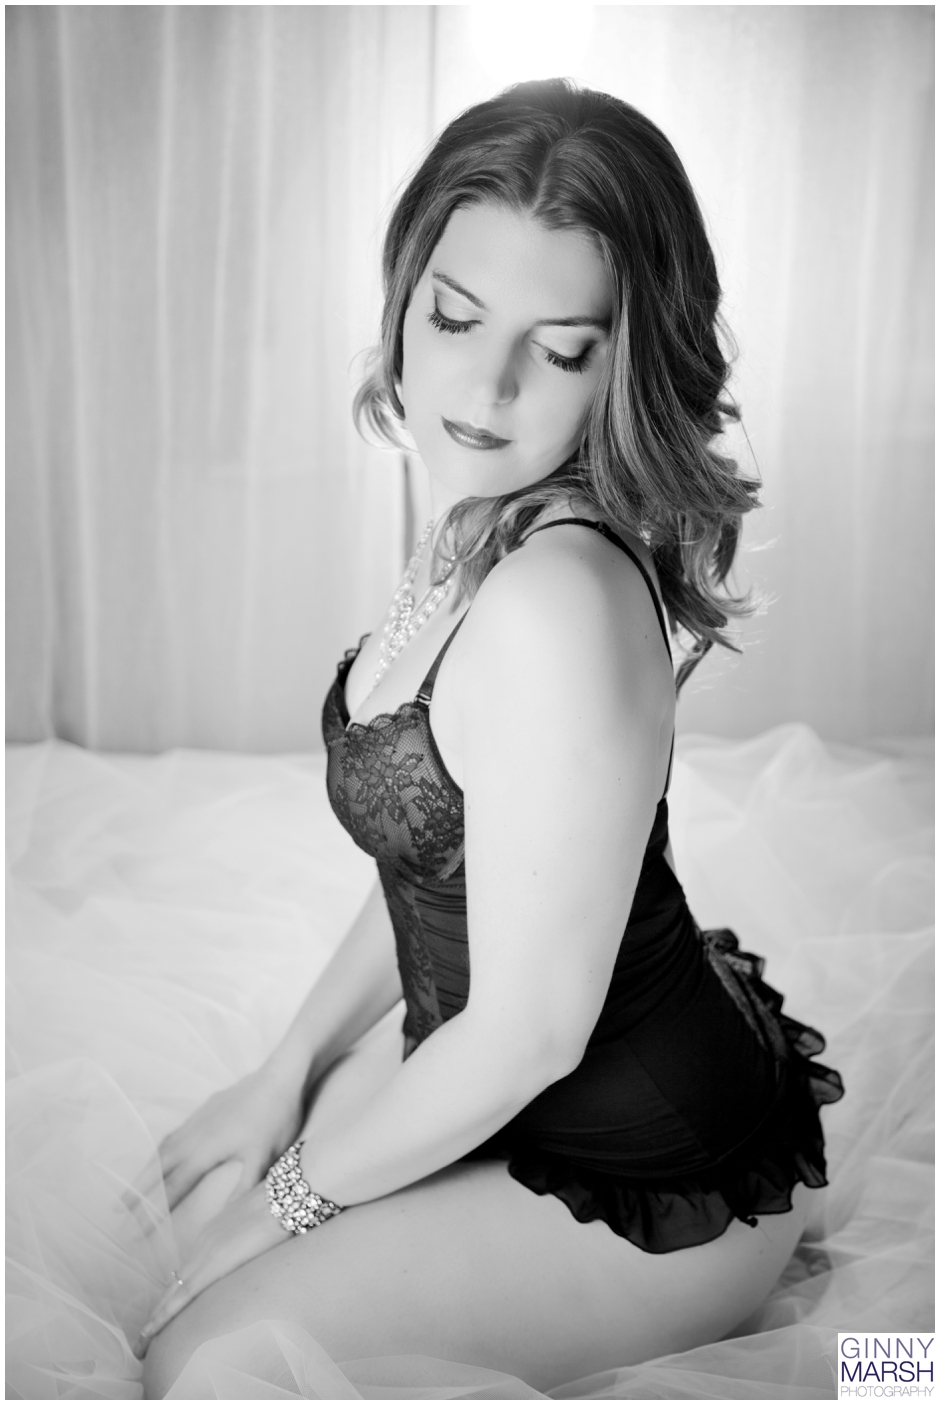 New from Classy & Sassy Boudoir Photography with Russ Gunt… | Flickr